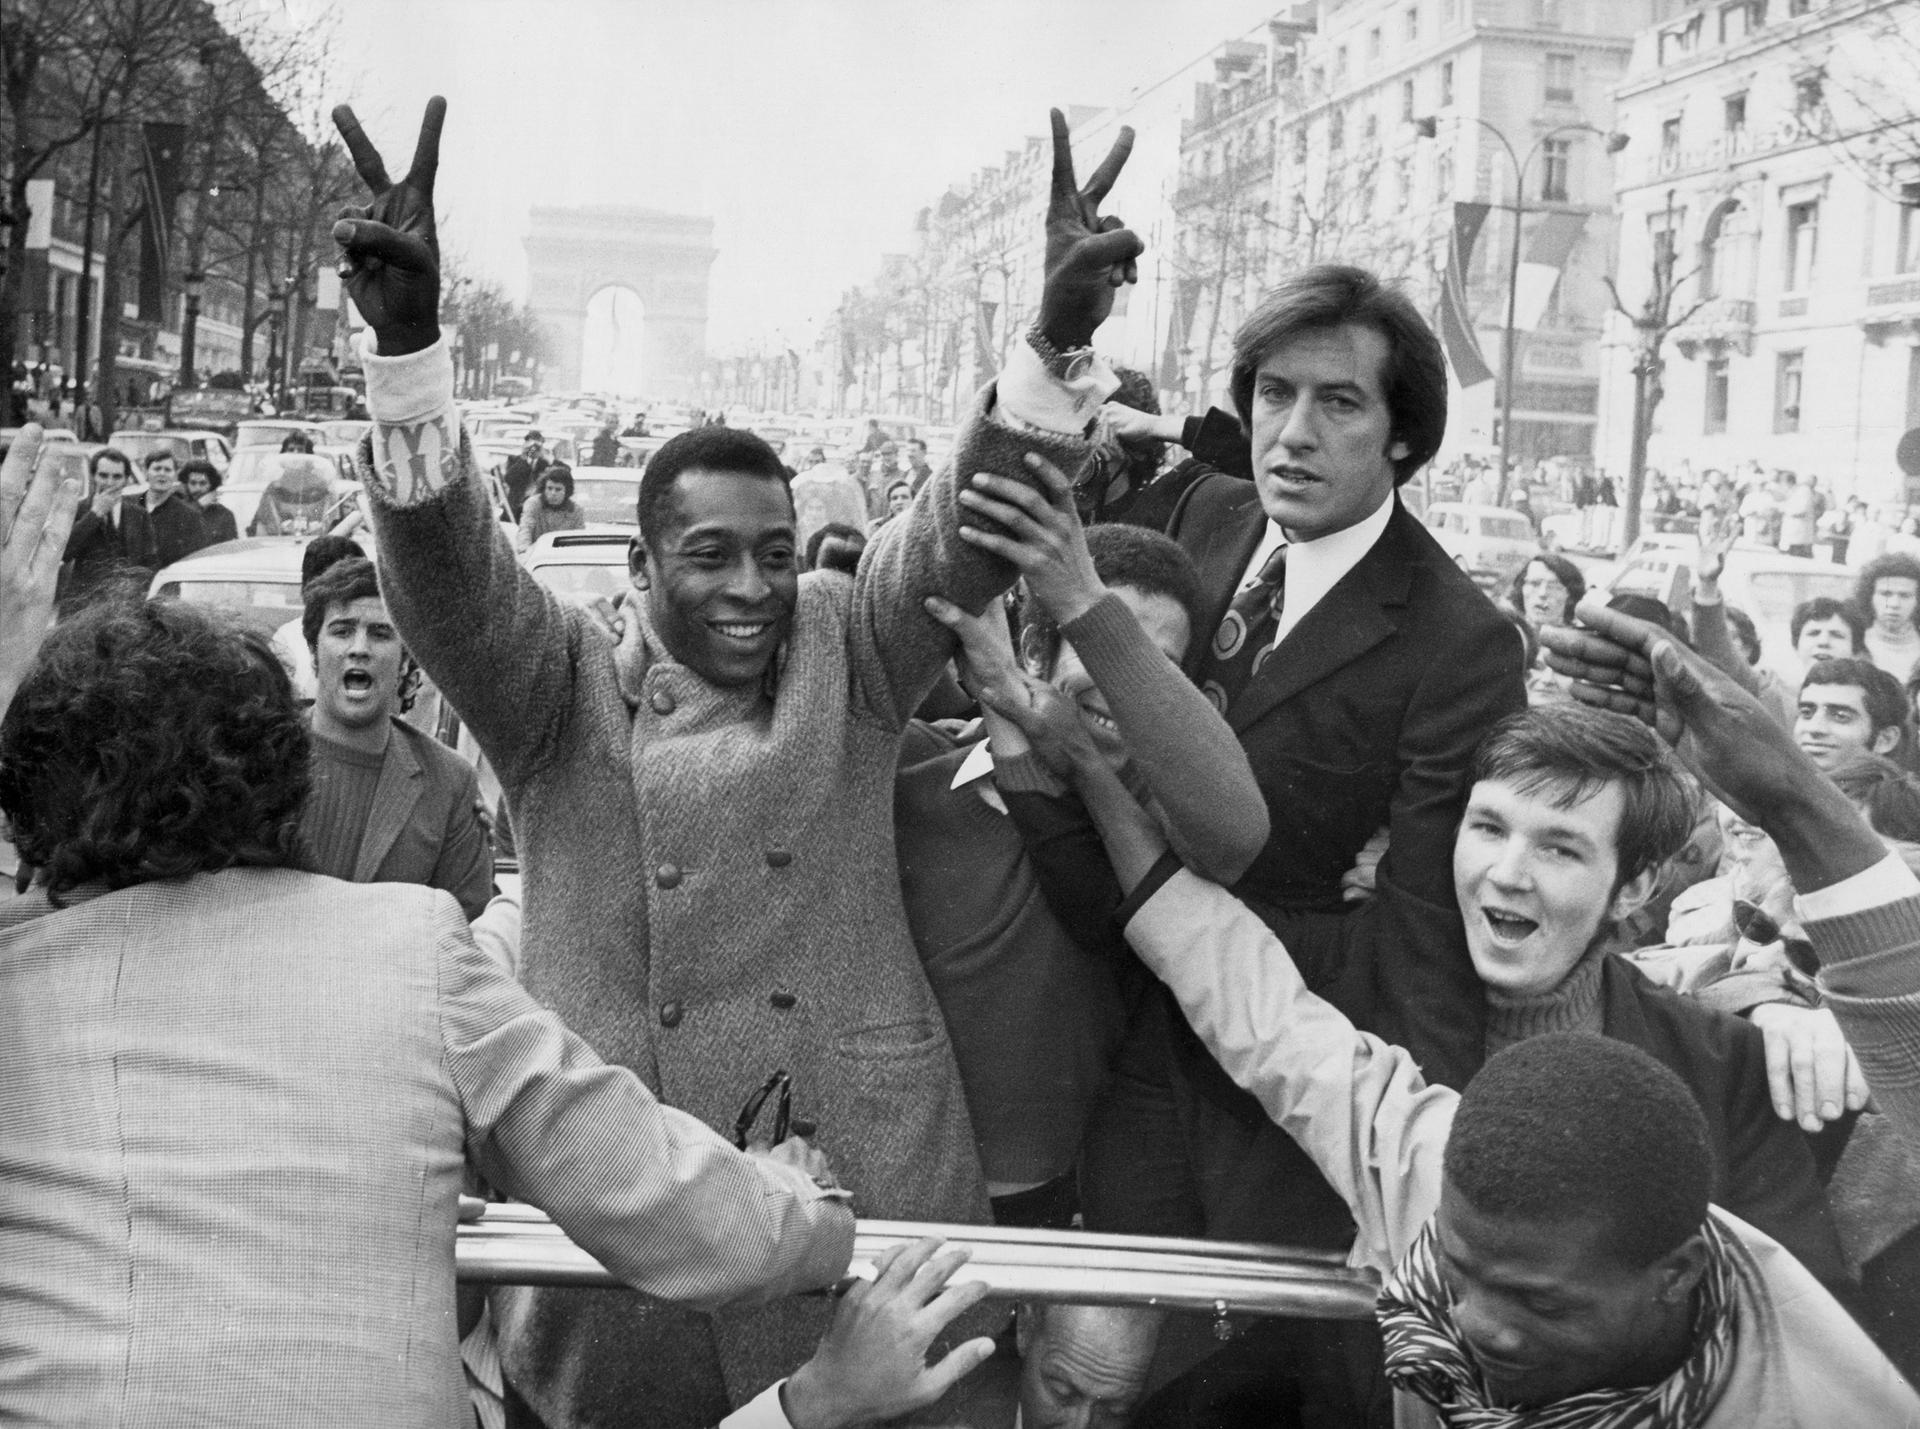 Pele standing and flashing a victory sign, surrounded by happy French people, in Paris 